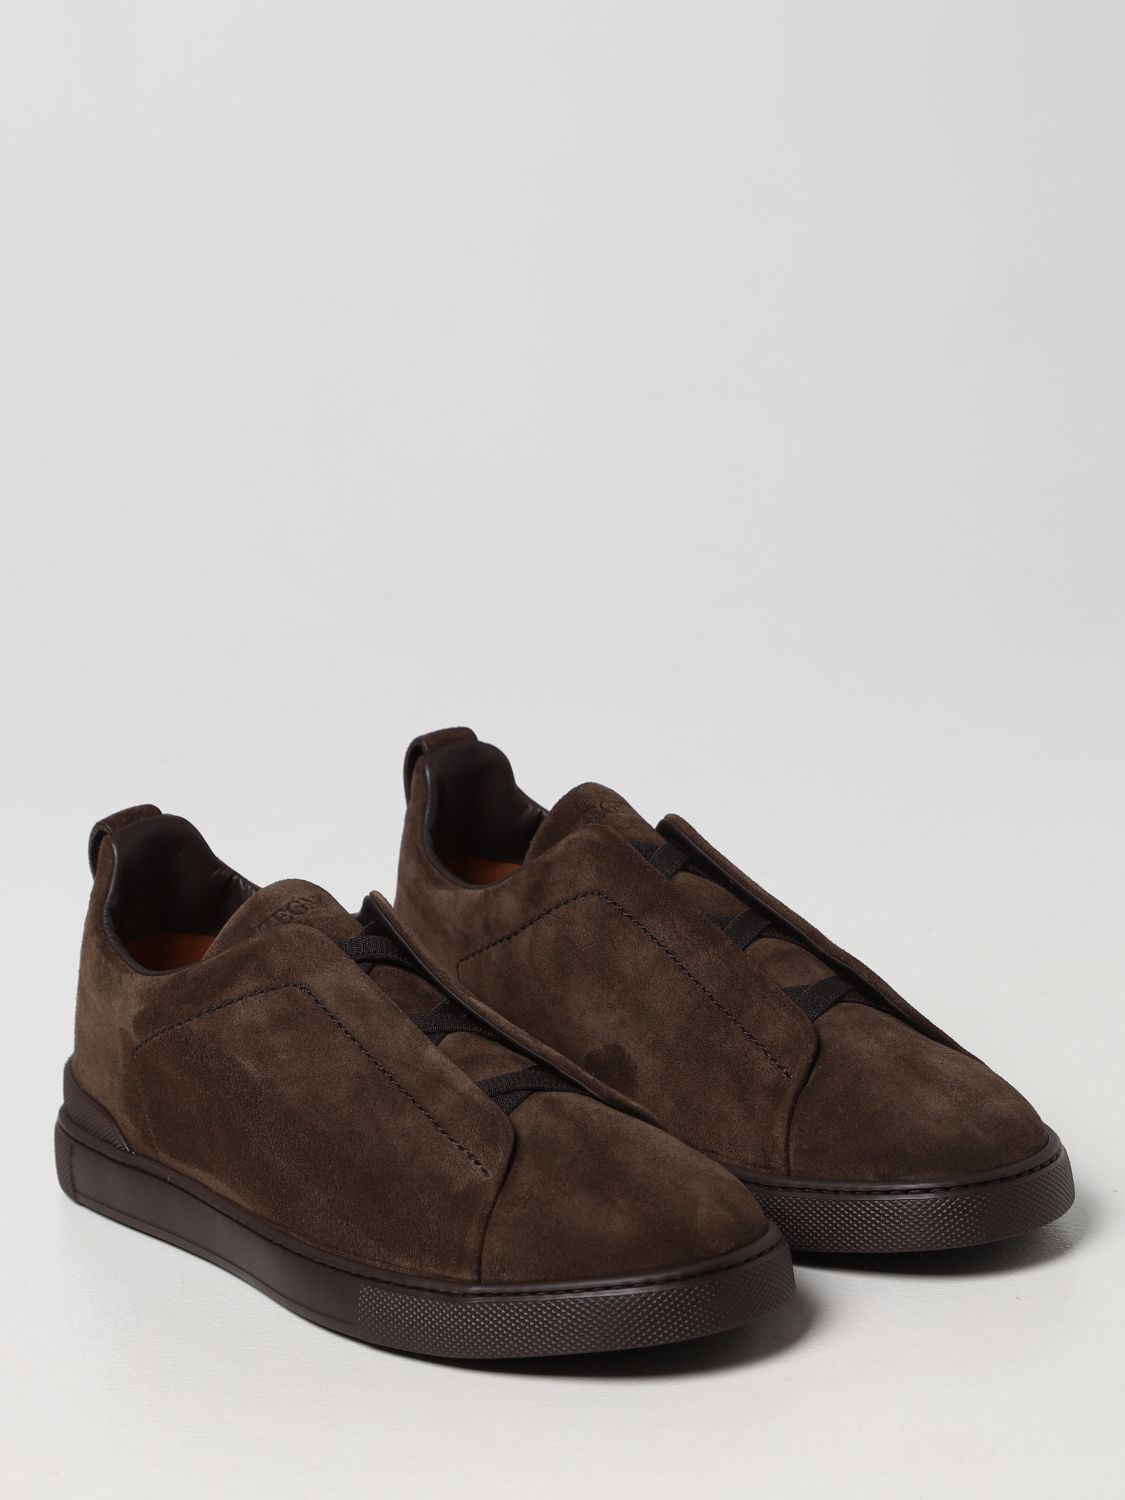 Trainers Zegna: Zegna trainers for men dark 2